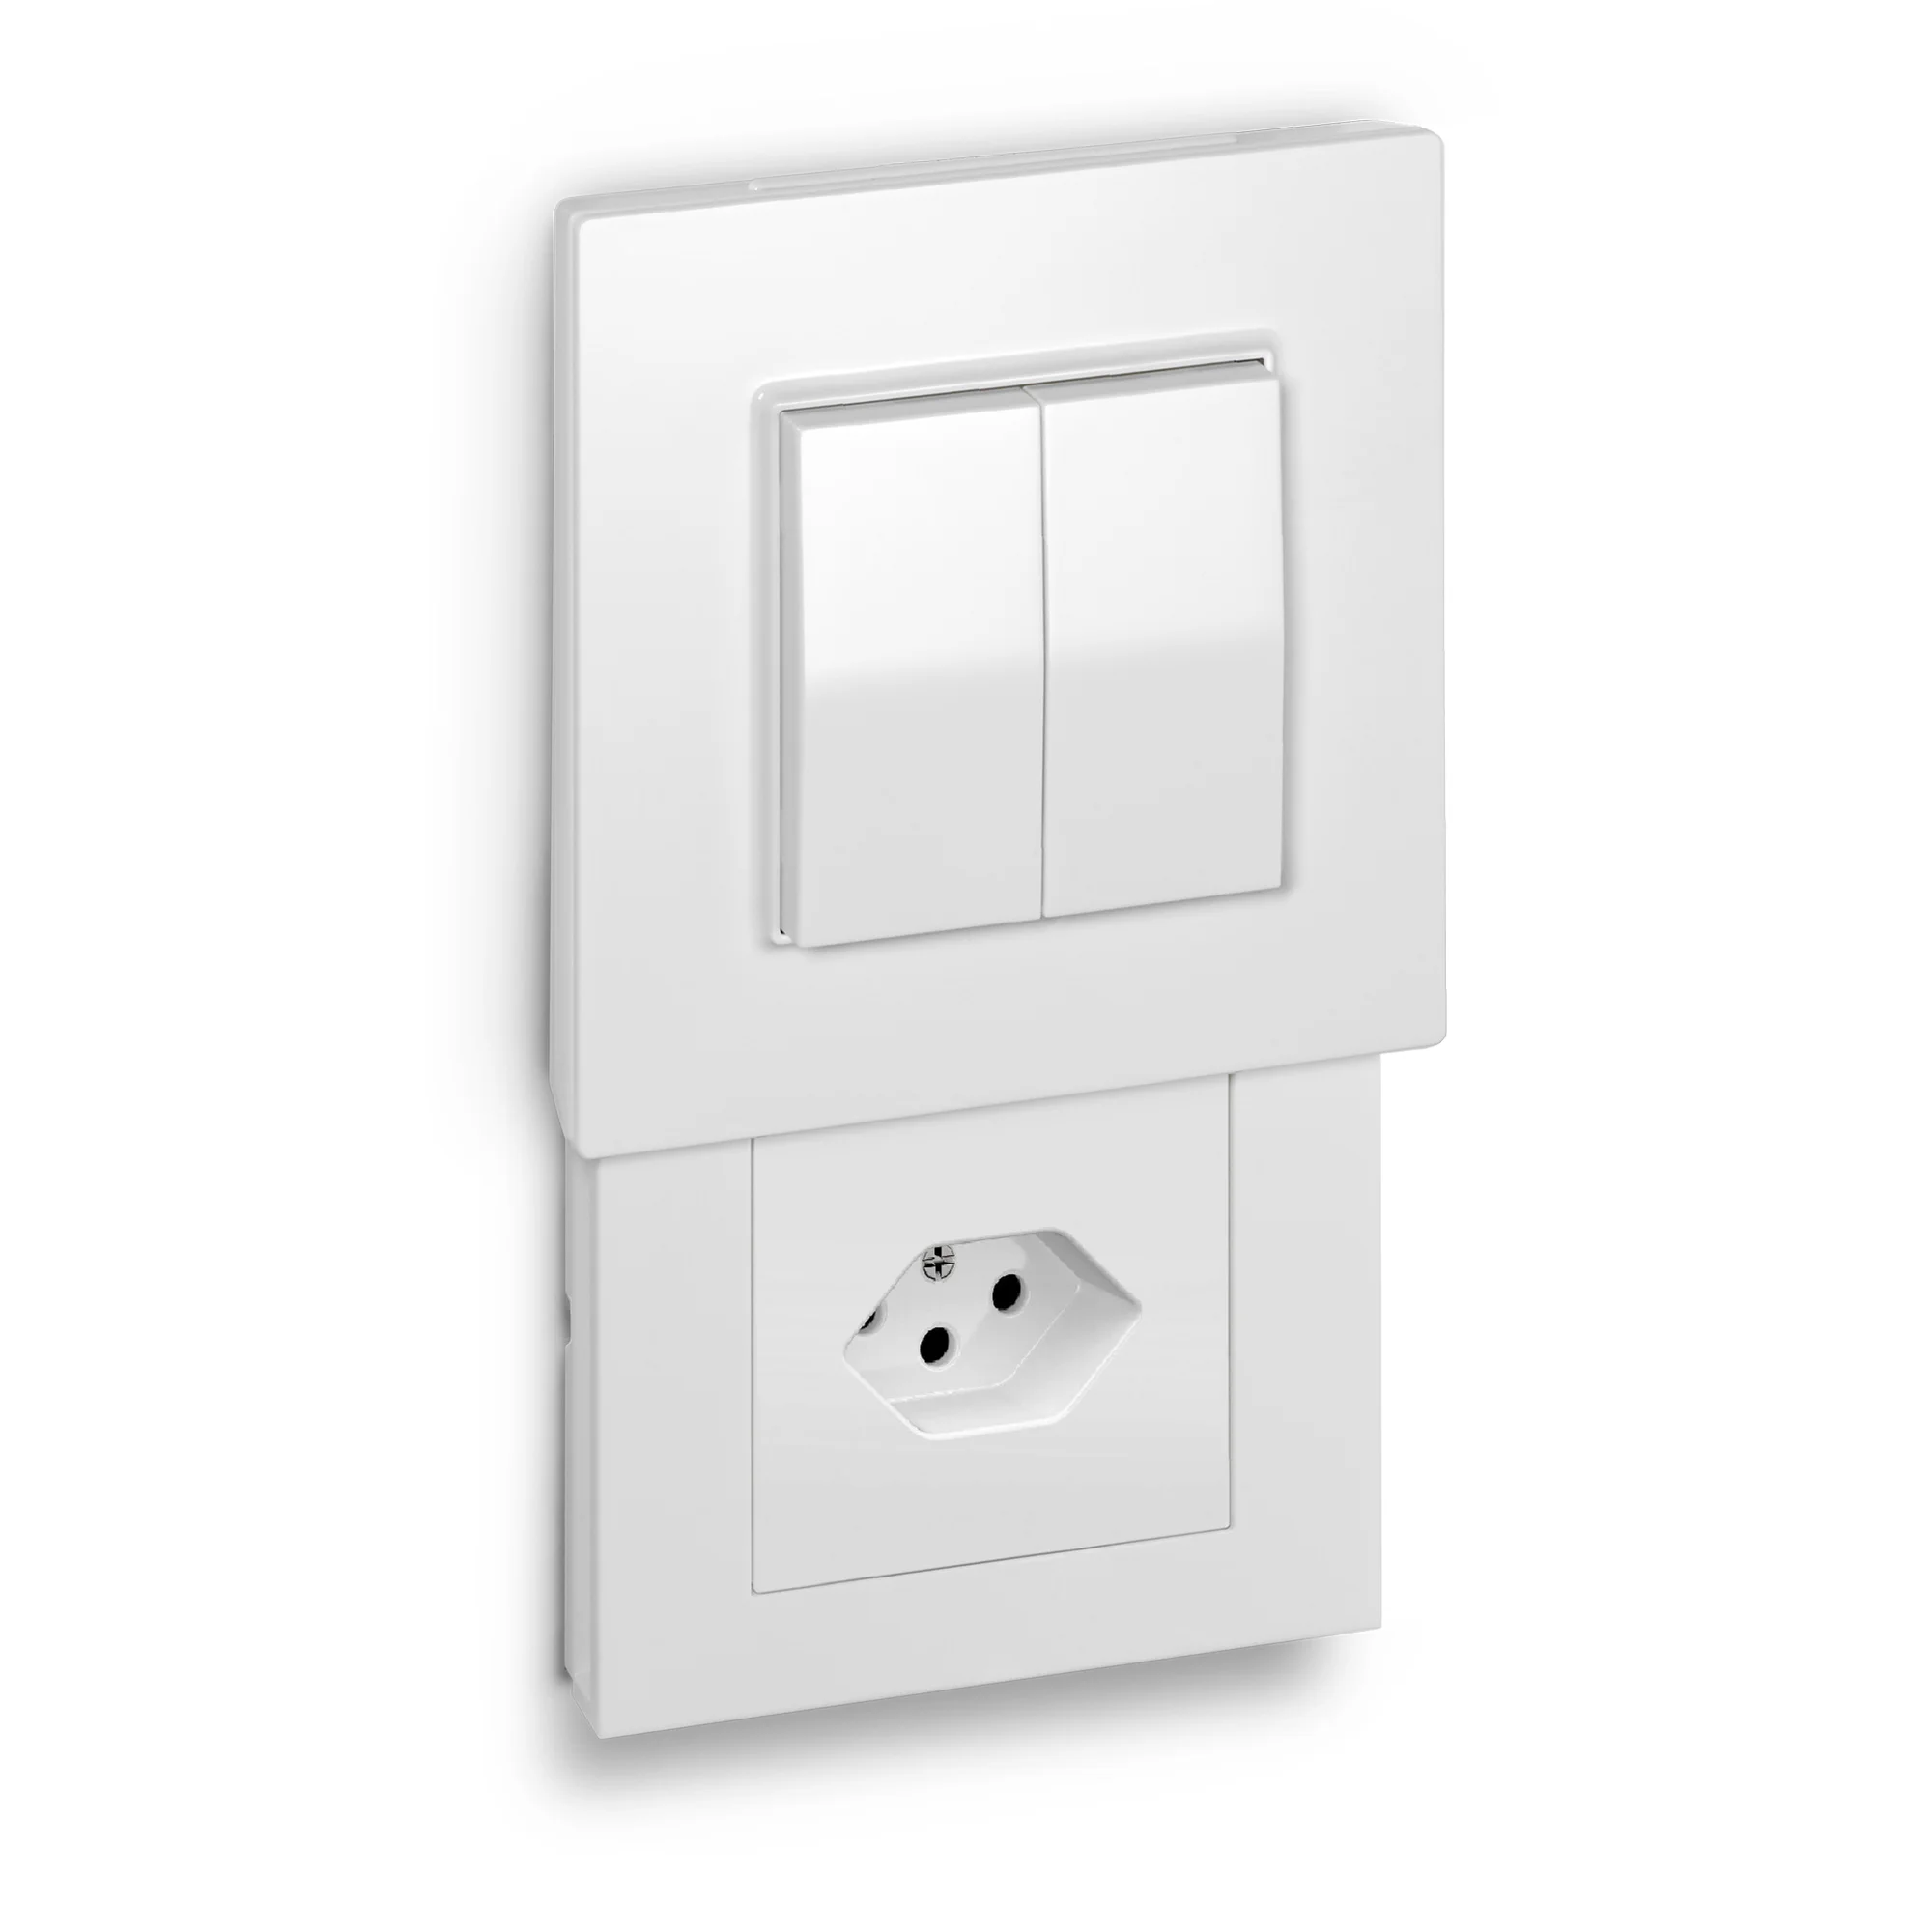 Hidden Socket | Versteckdose® with Friends of Hue switch with socket insert for plug type J (CH)